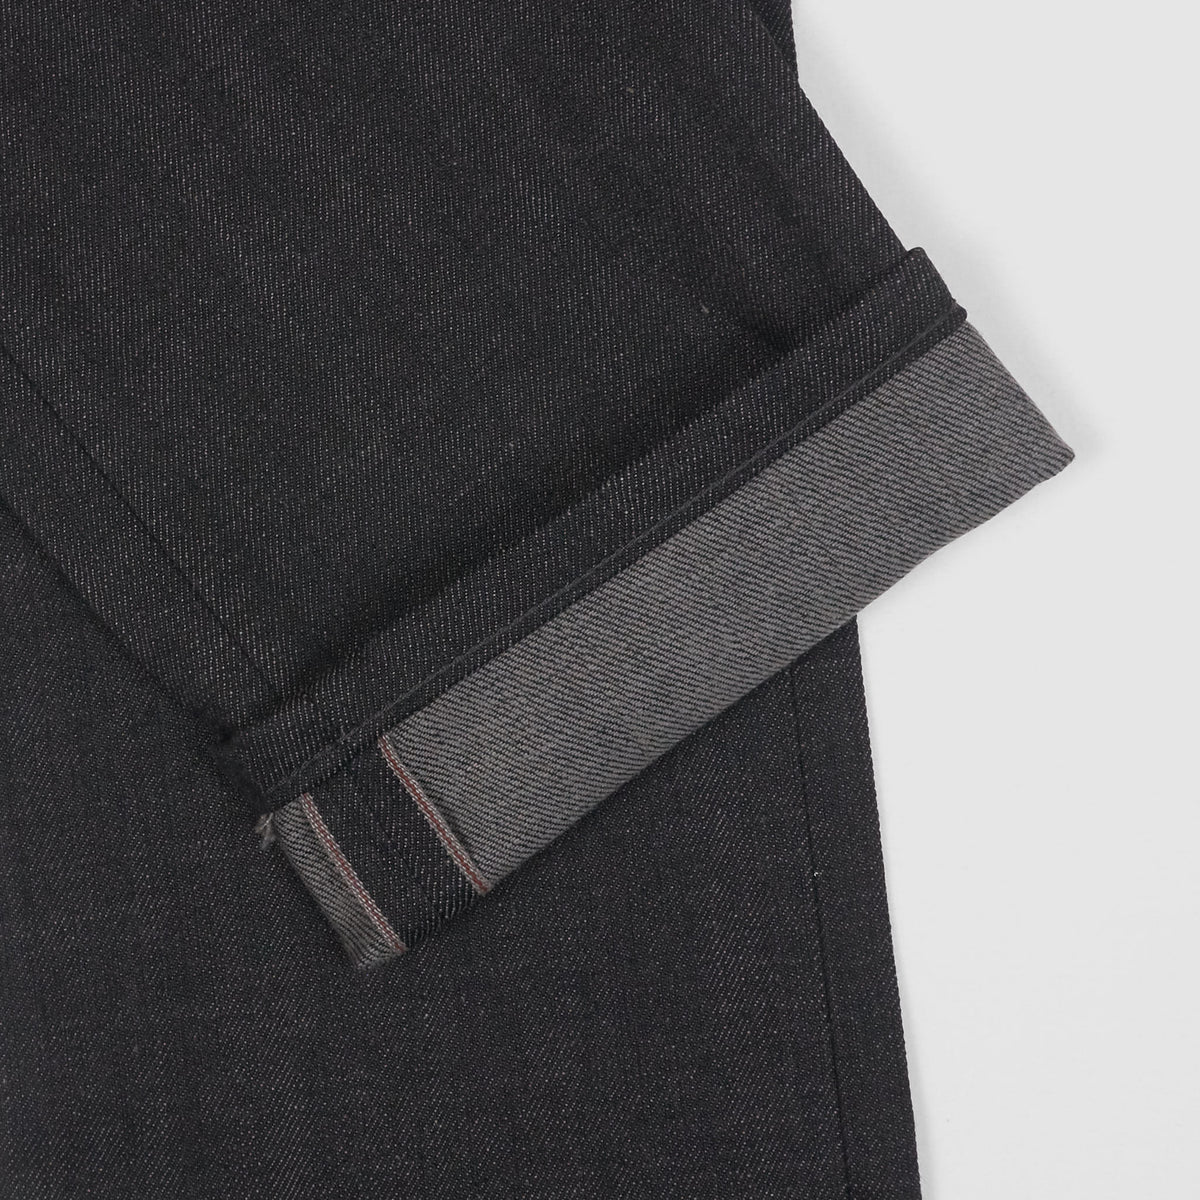 Naked &amp; Famous Stretch Selvage Denim Black x Grey Weird Guy